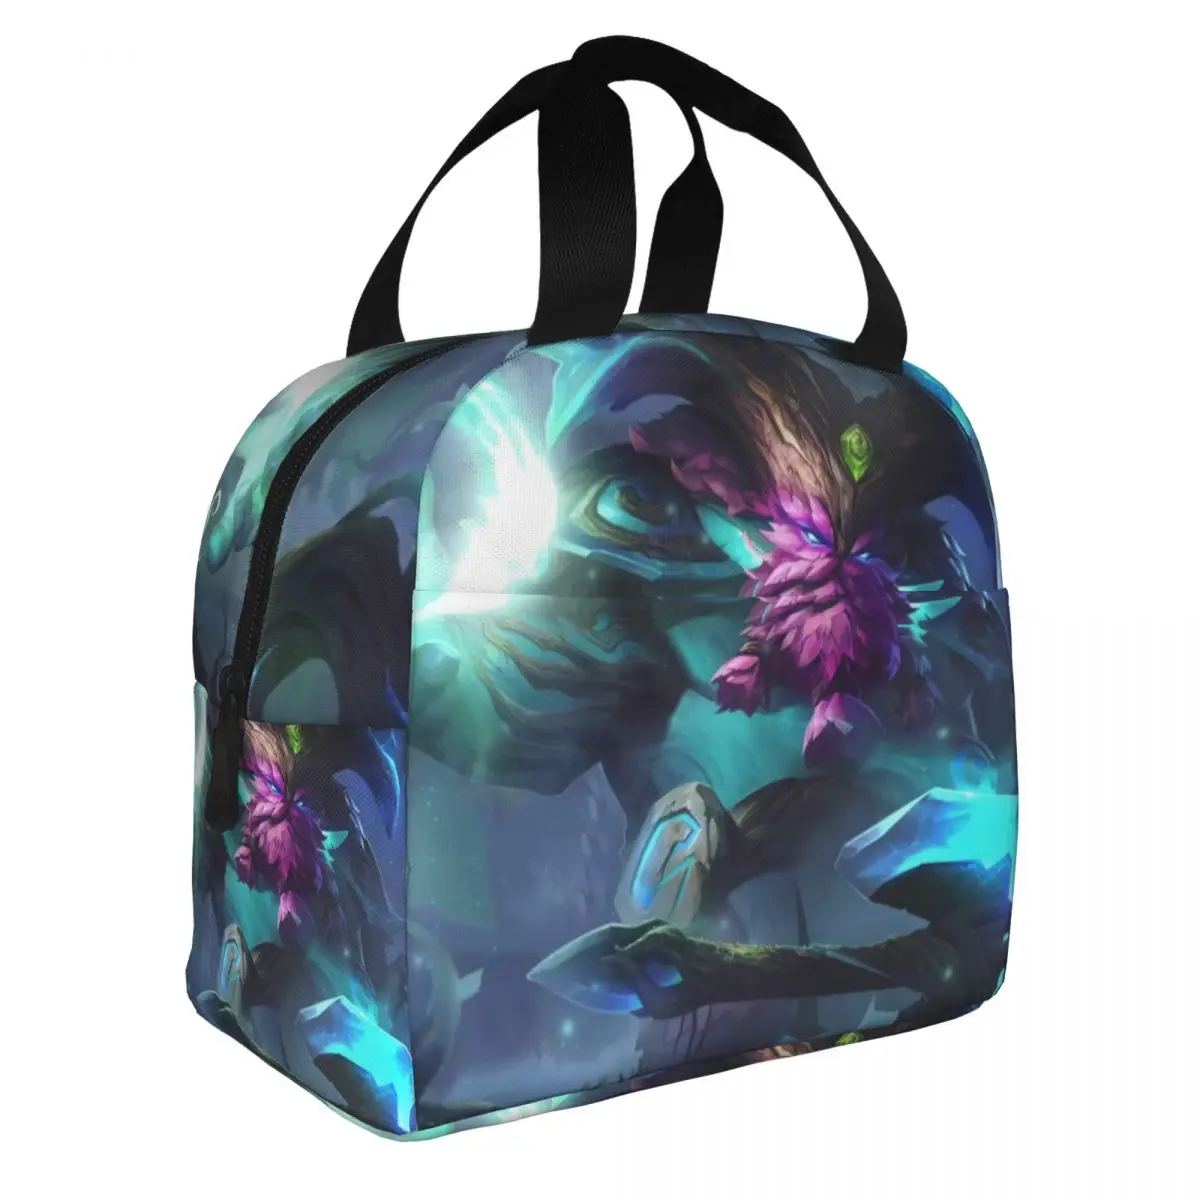 Ornn League Of Legends LOL MOBA Games Lunch Bento Bag Portable Aluminum Foil thickened Thermal Cloth Lunch Bag for Women Men Boy